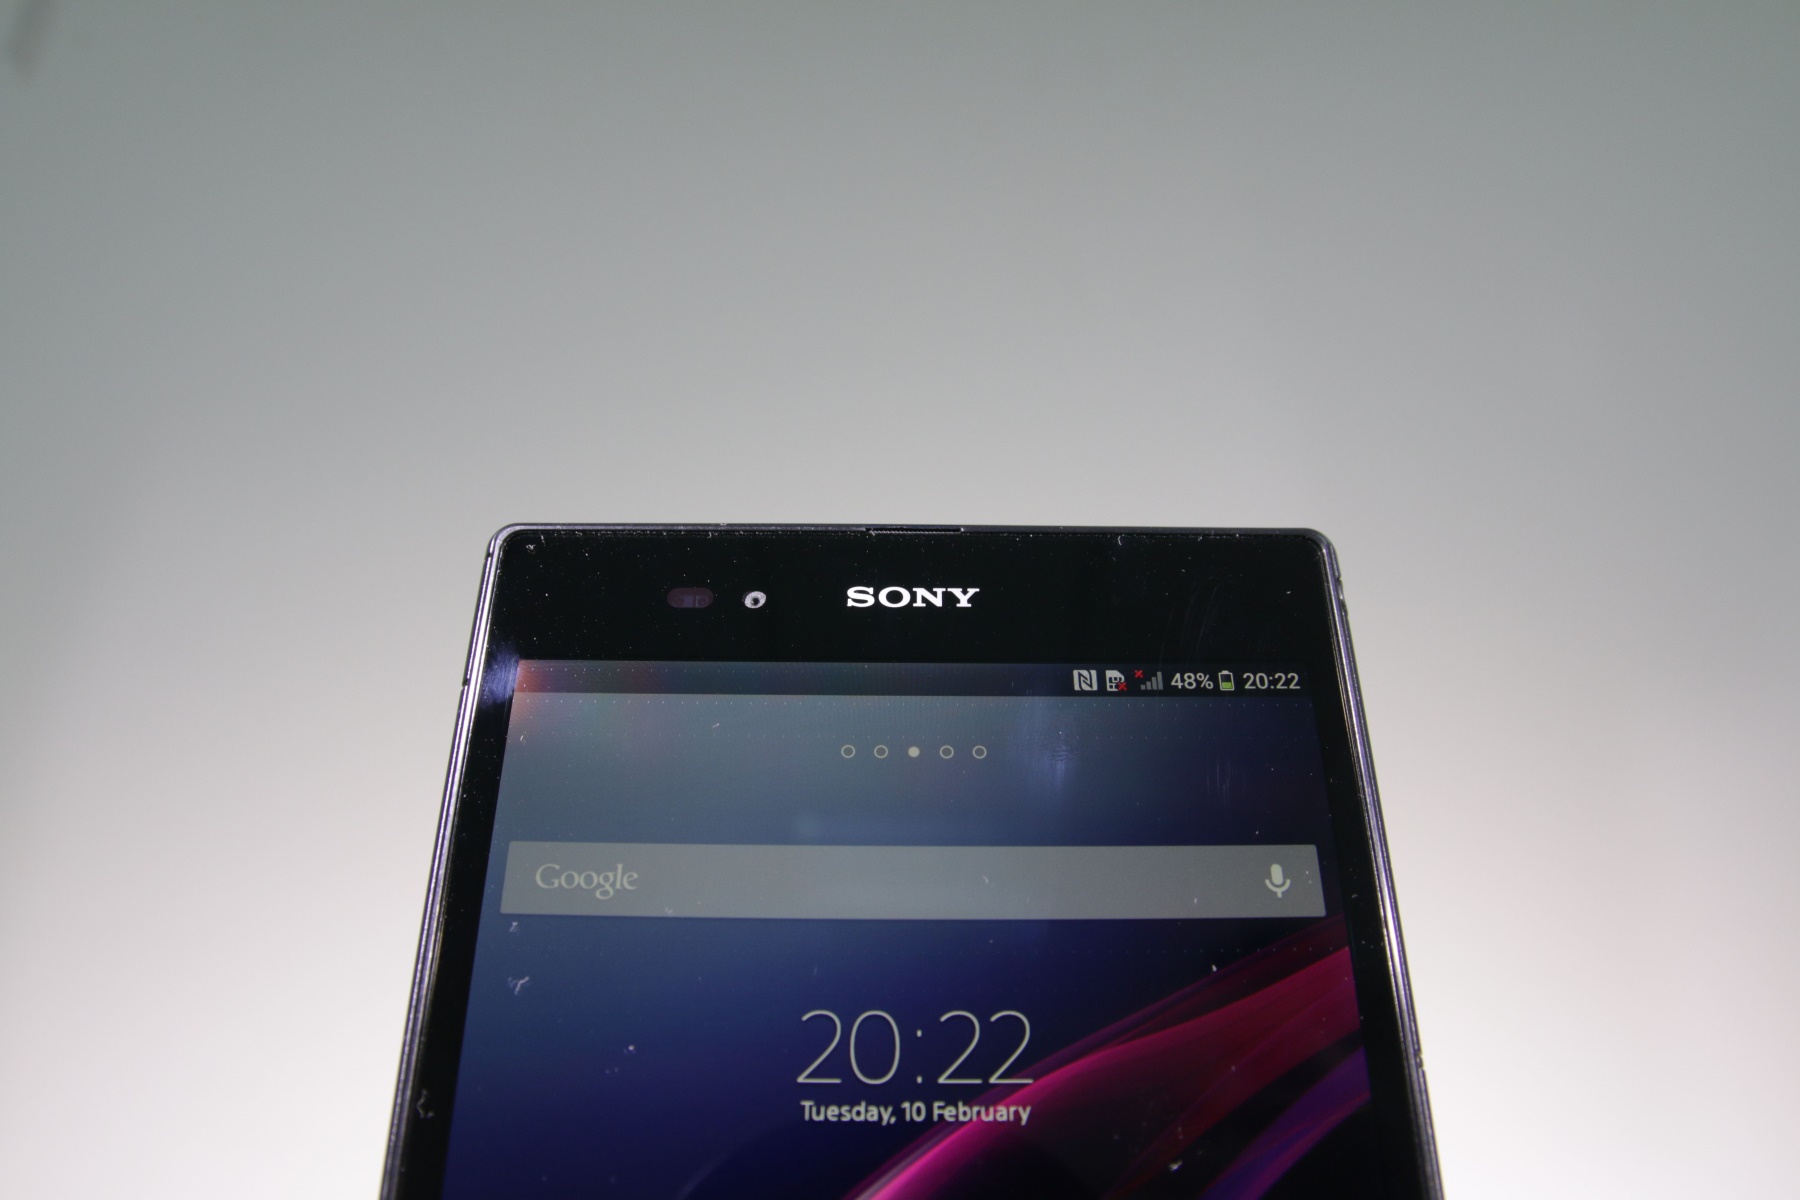 Xperia Z Ultra Rooting: A Step-by-Step Guide